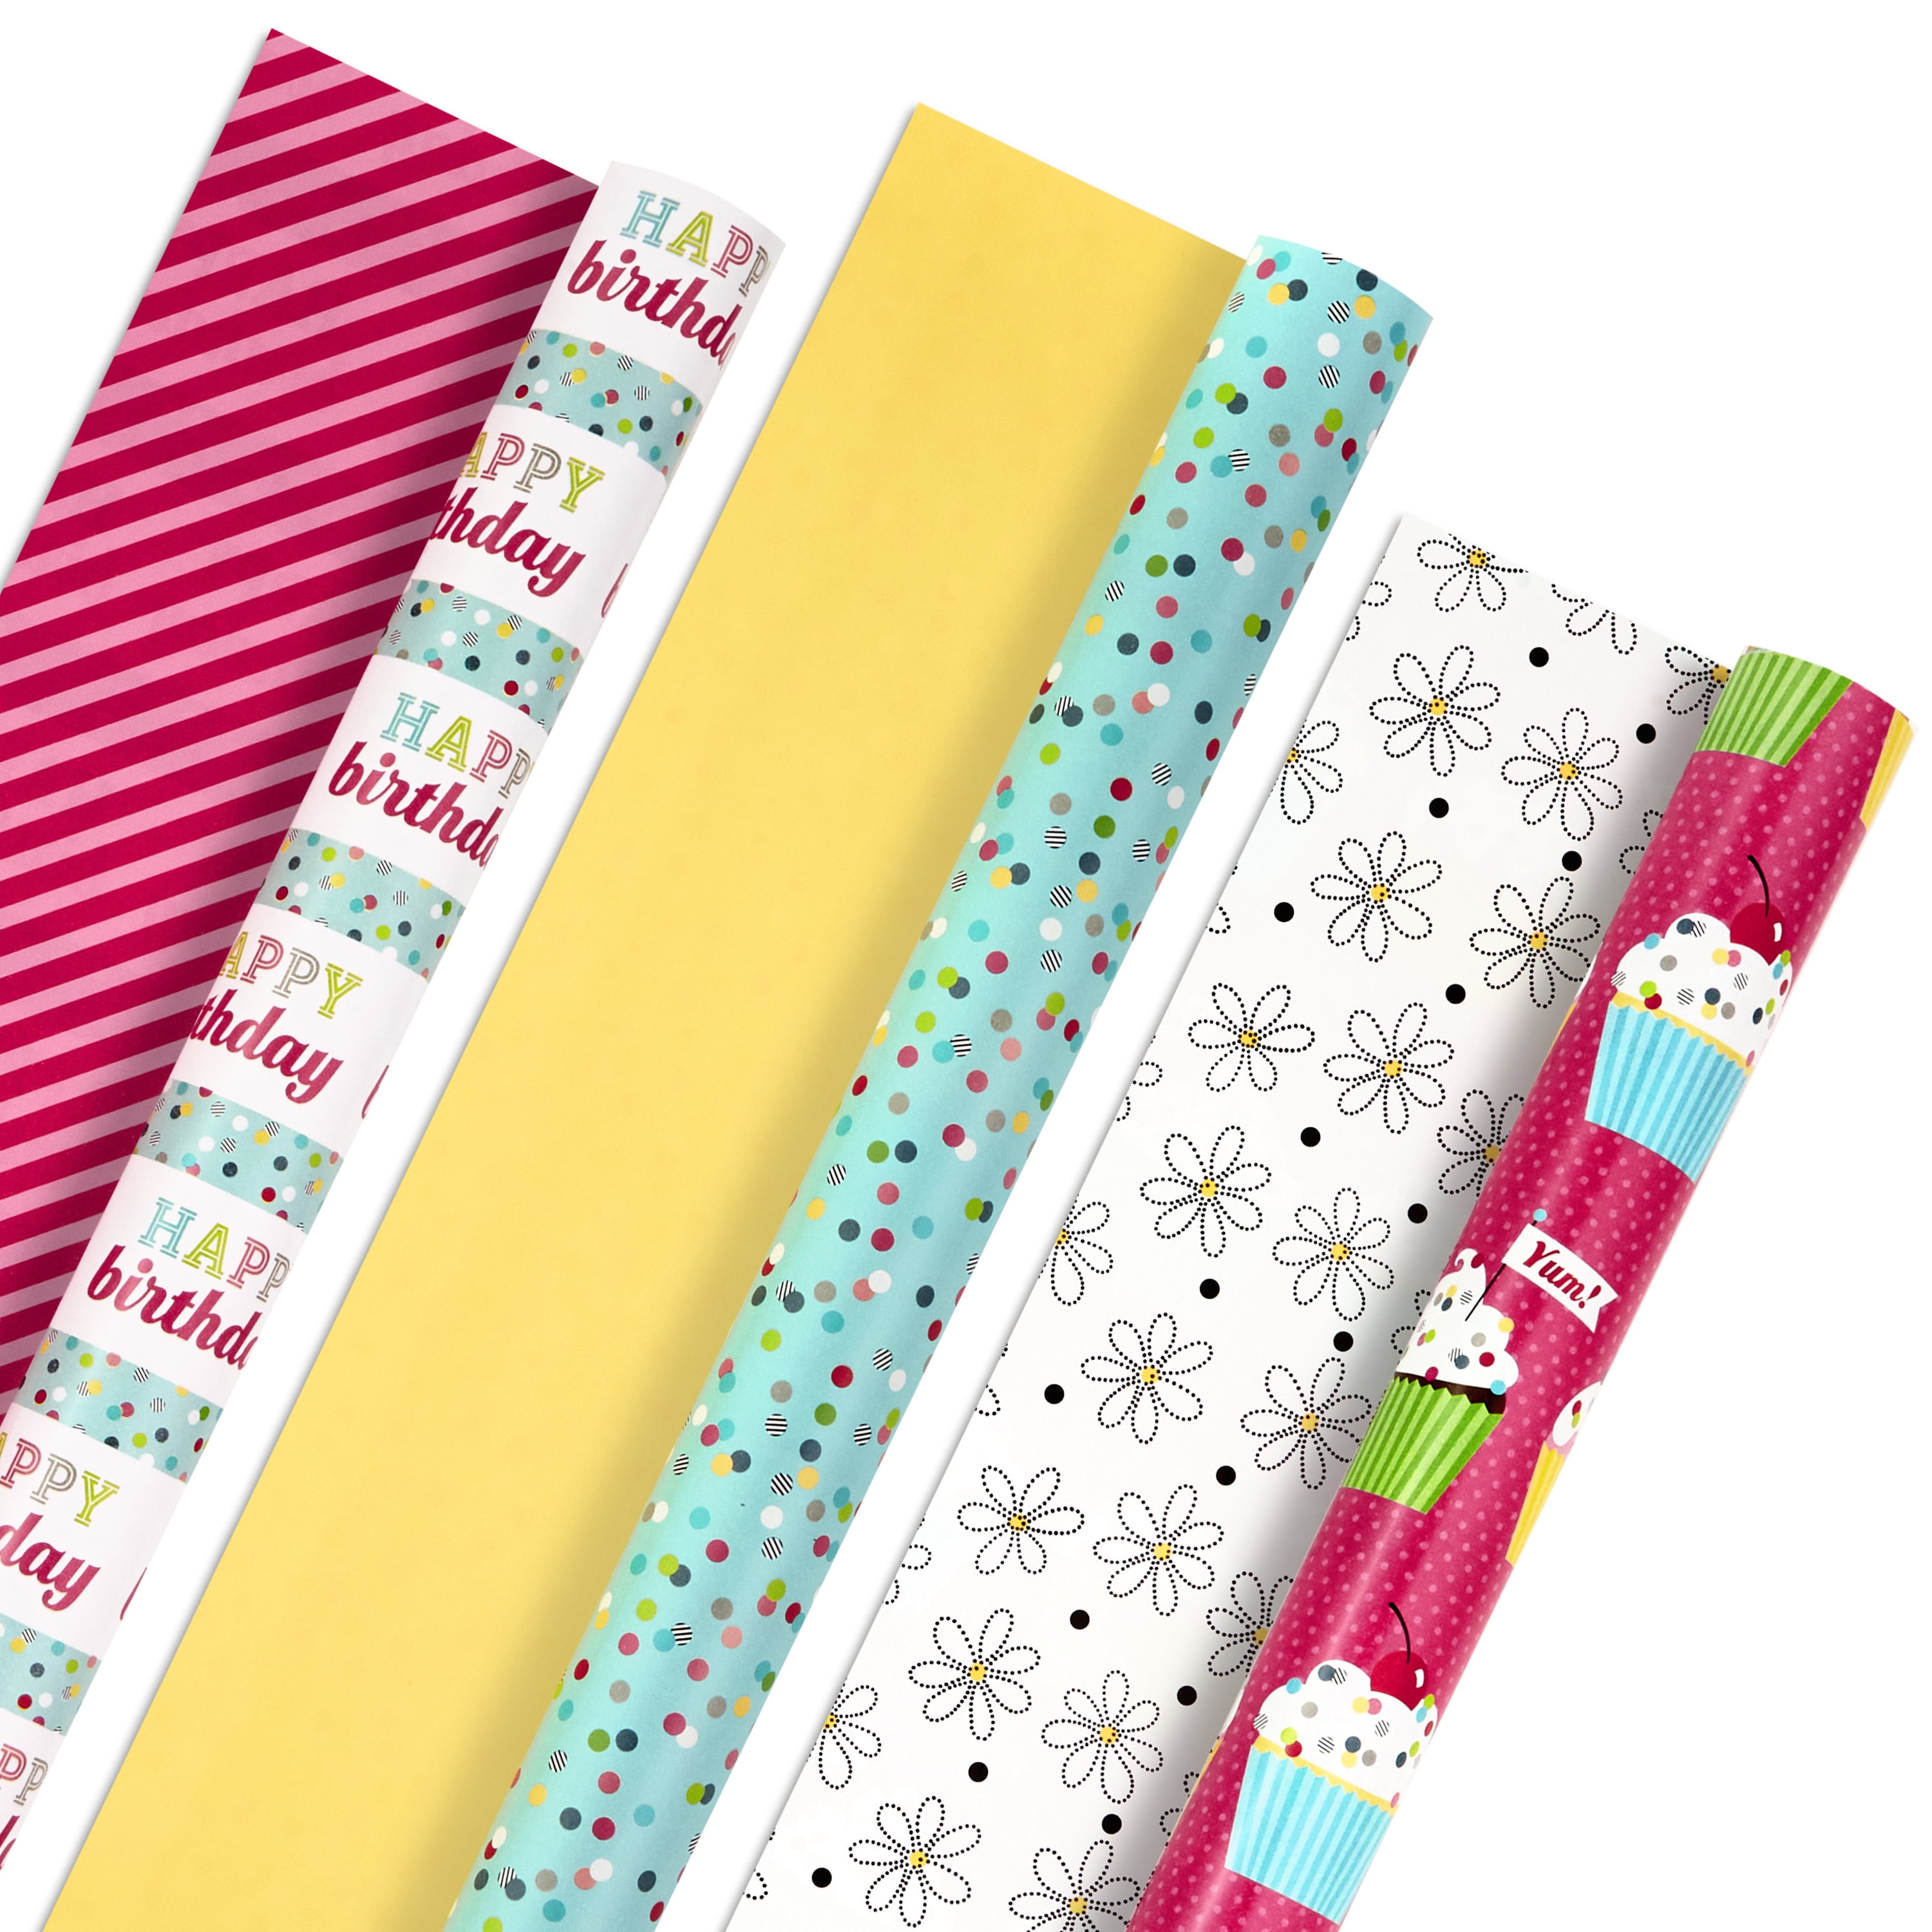 Premium Yellow Wrapping Paper - Glossy Solid, 25 Sq Ft